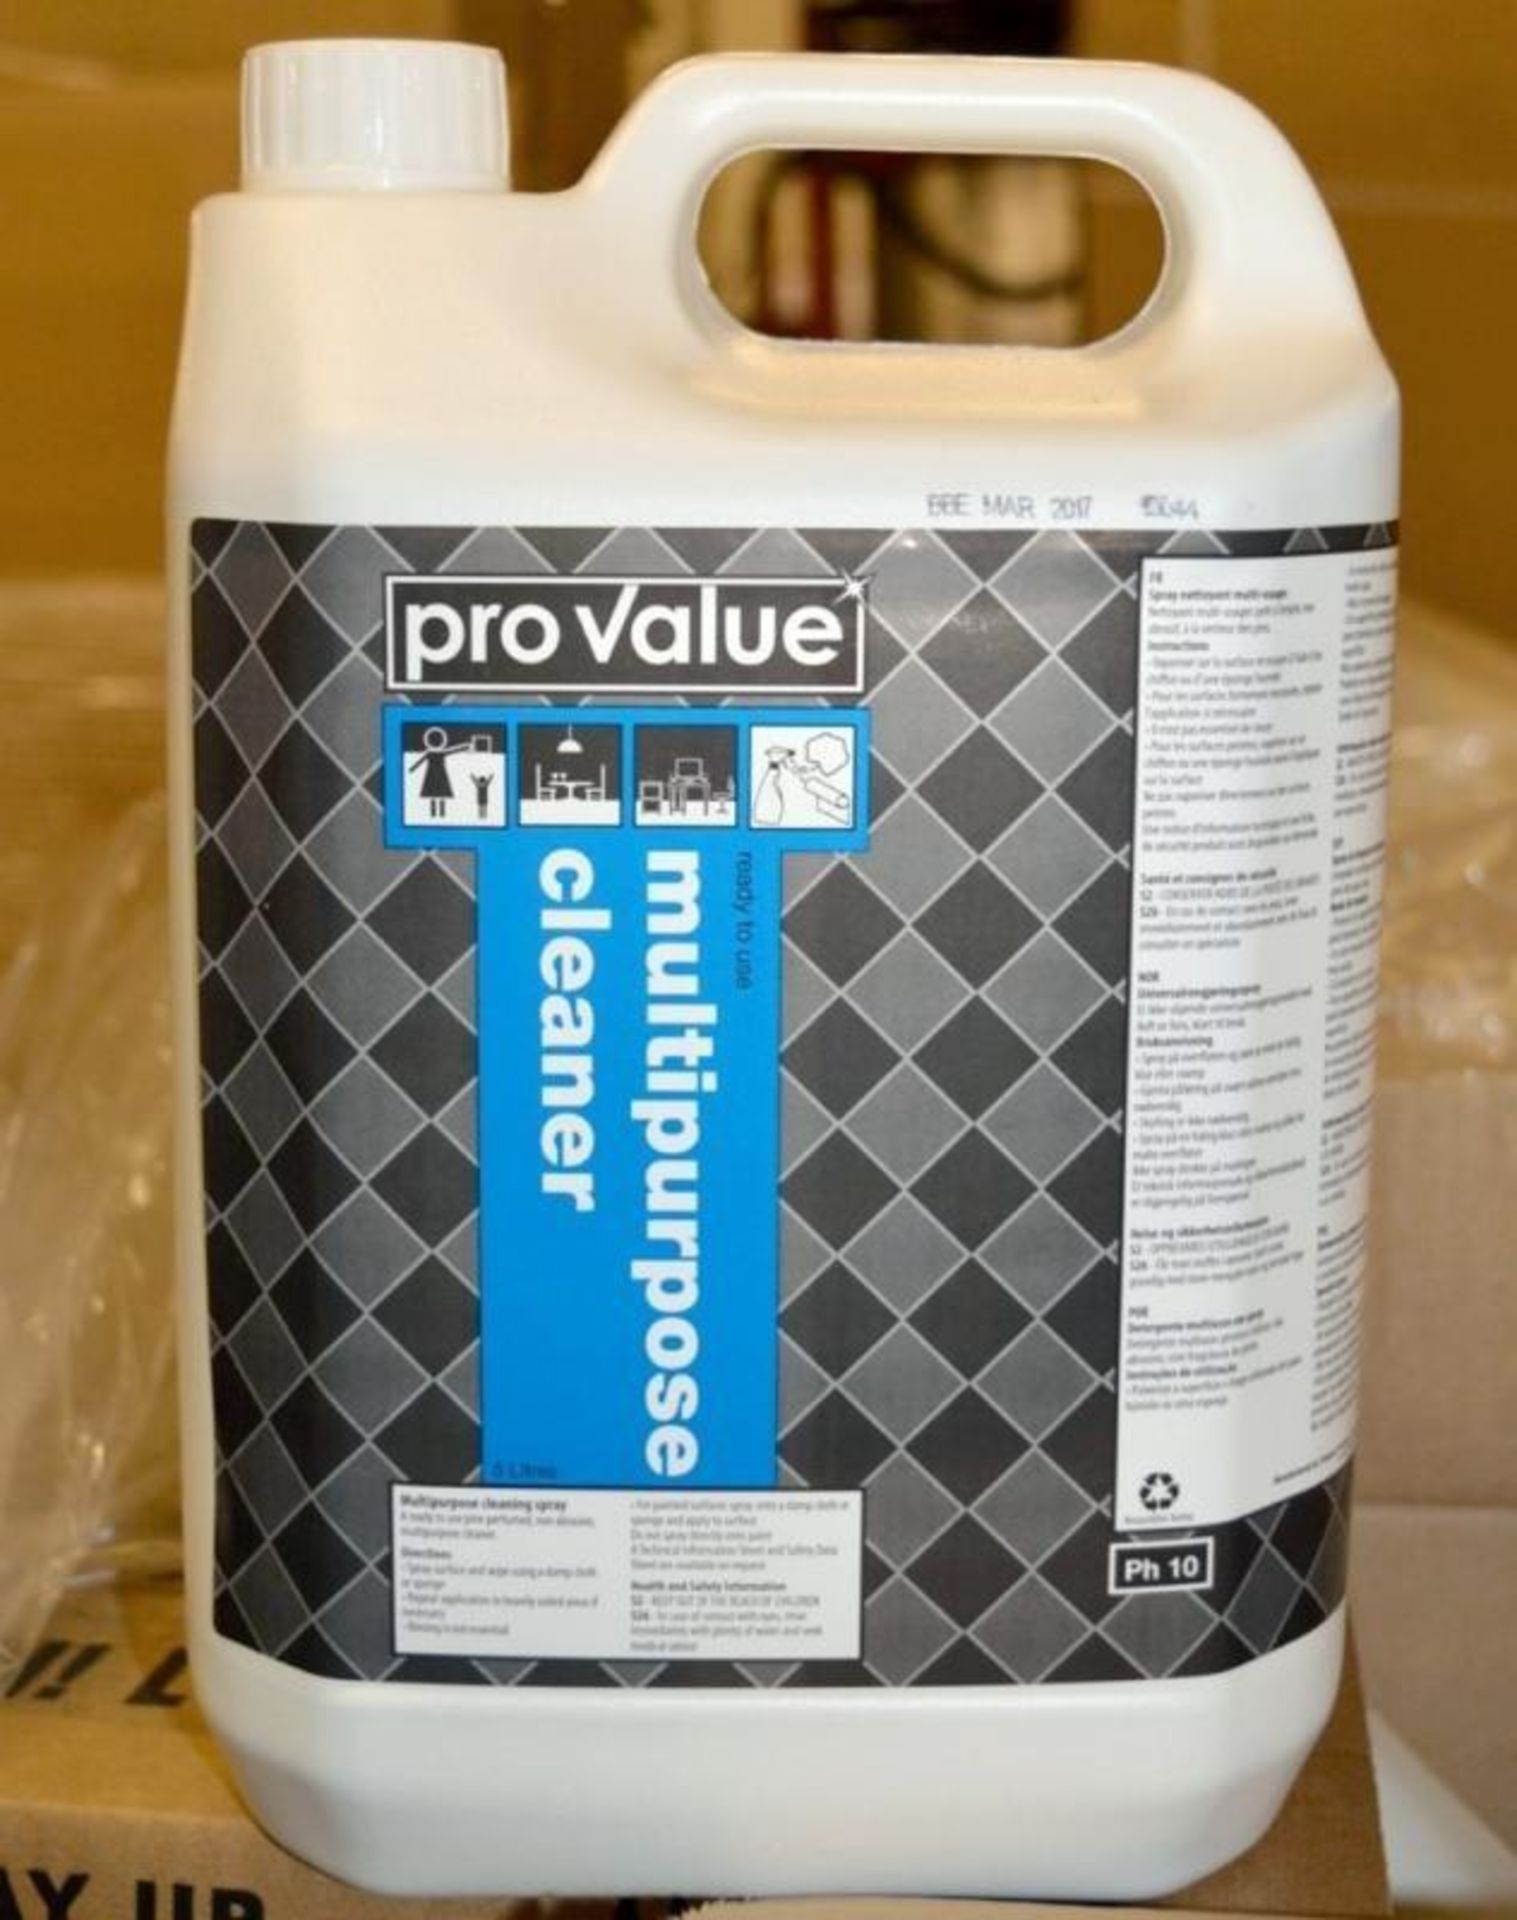 10 x Pro Value Multipurpose Cleaner - A Ready To Use Pine Scented, Non Abrasive Cleaner - Includes 1